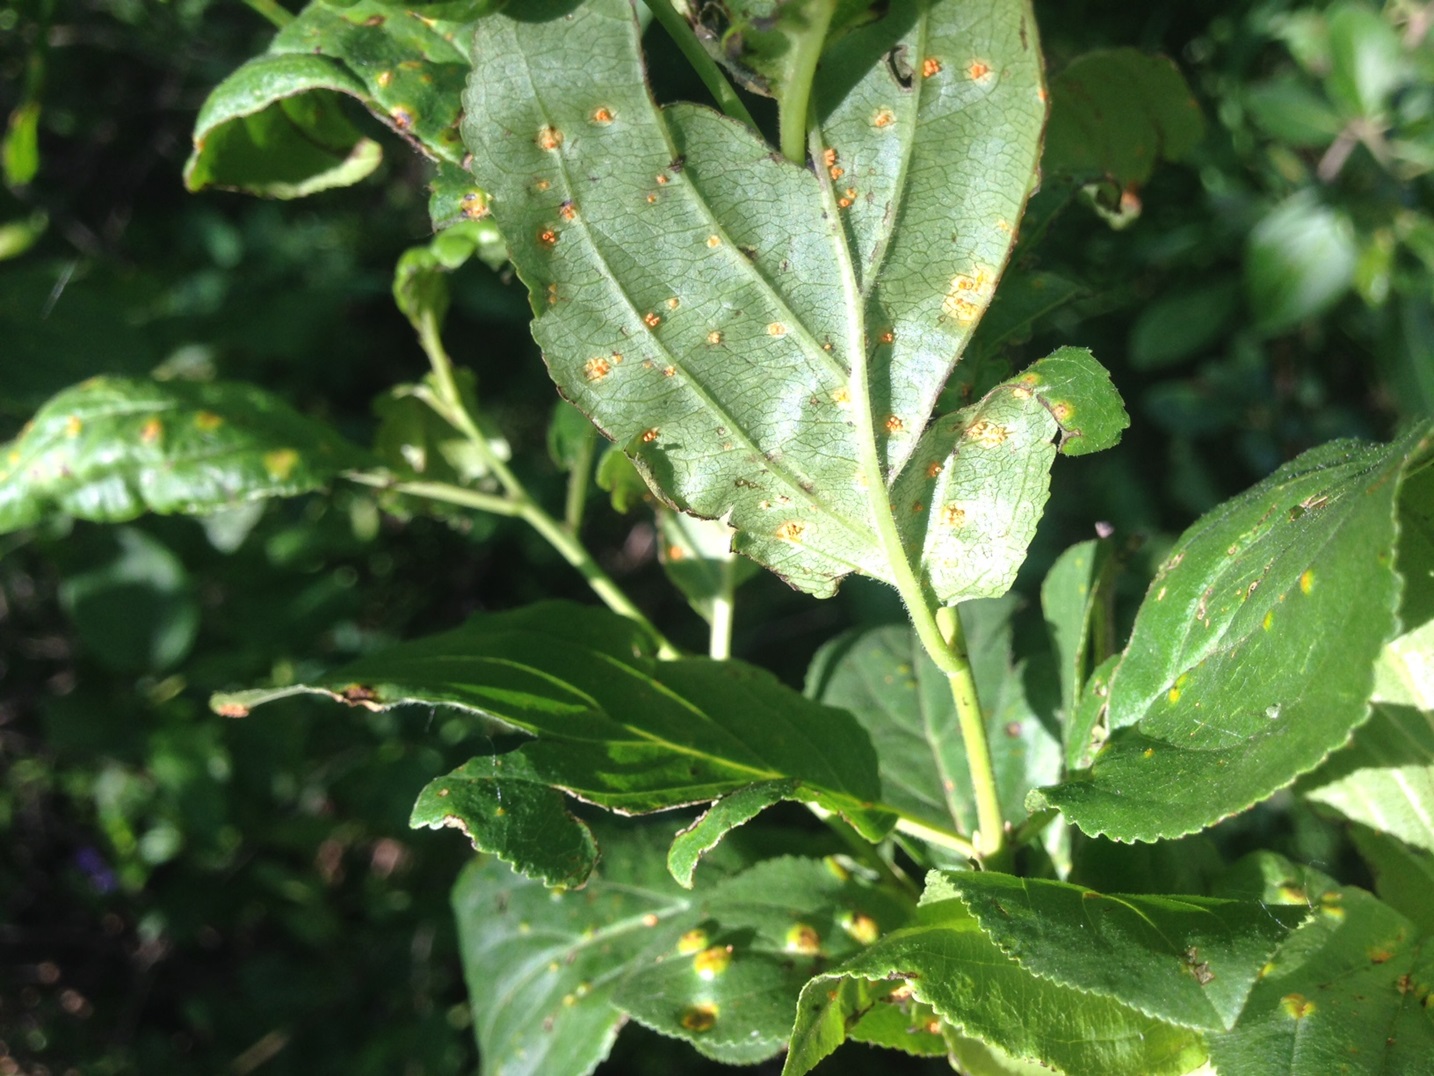 A green, leafy plant with orange-yellow spots developing on it.